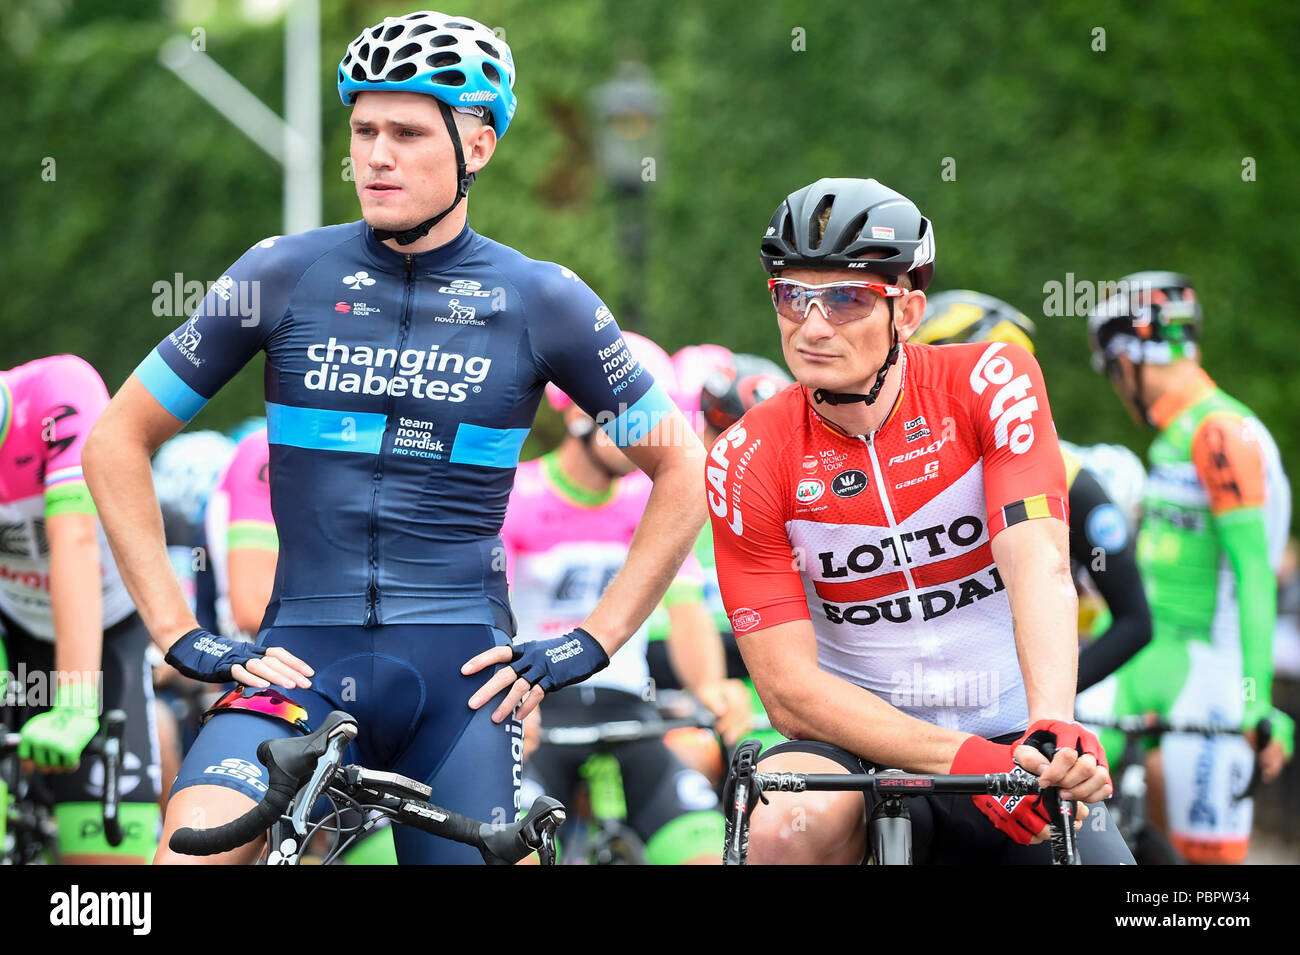 https://c8.alamy.com/comp/PBPW34/london-uk-29-july-2018-sam-brand-l-team-novo-nordisk-and-andre-greipel-r-team-lotto-soudal-on-the-start-line-for-the-prudential-ridelondon-surrey-classic-britains-only-mens-uci-worldtour-race-and-the-worlds-richest-one-day-classic-race-starting-in-horse-guards-parade-the-183km-race-takes-in-a-route-around-the-outskirts-of-london-to-finish-in-the-mall-editorial-use-only-credit-stephen-chung-alamy-live-news-PBPW34.jpg